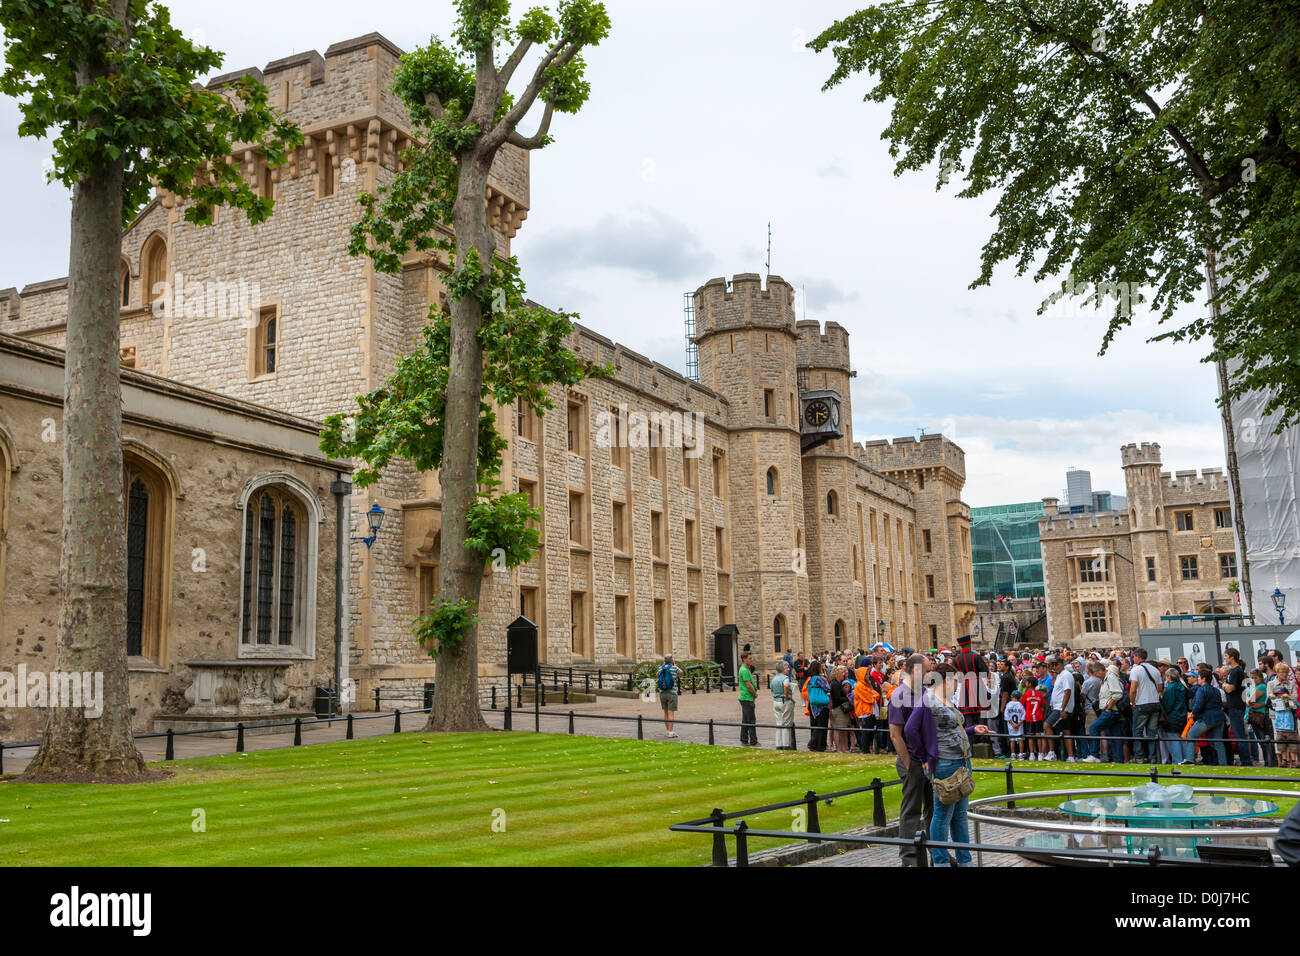 The south face of the Waterloo Barracks, Tower of London, London, England Stock Photo